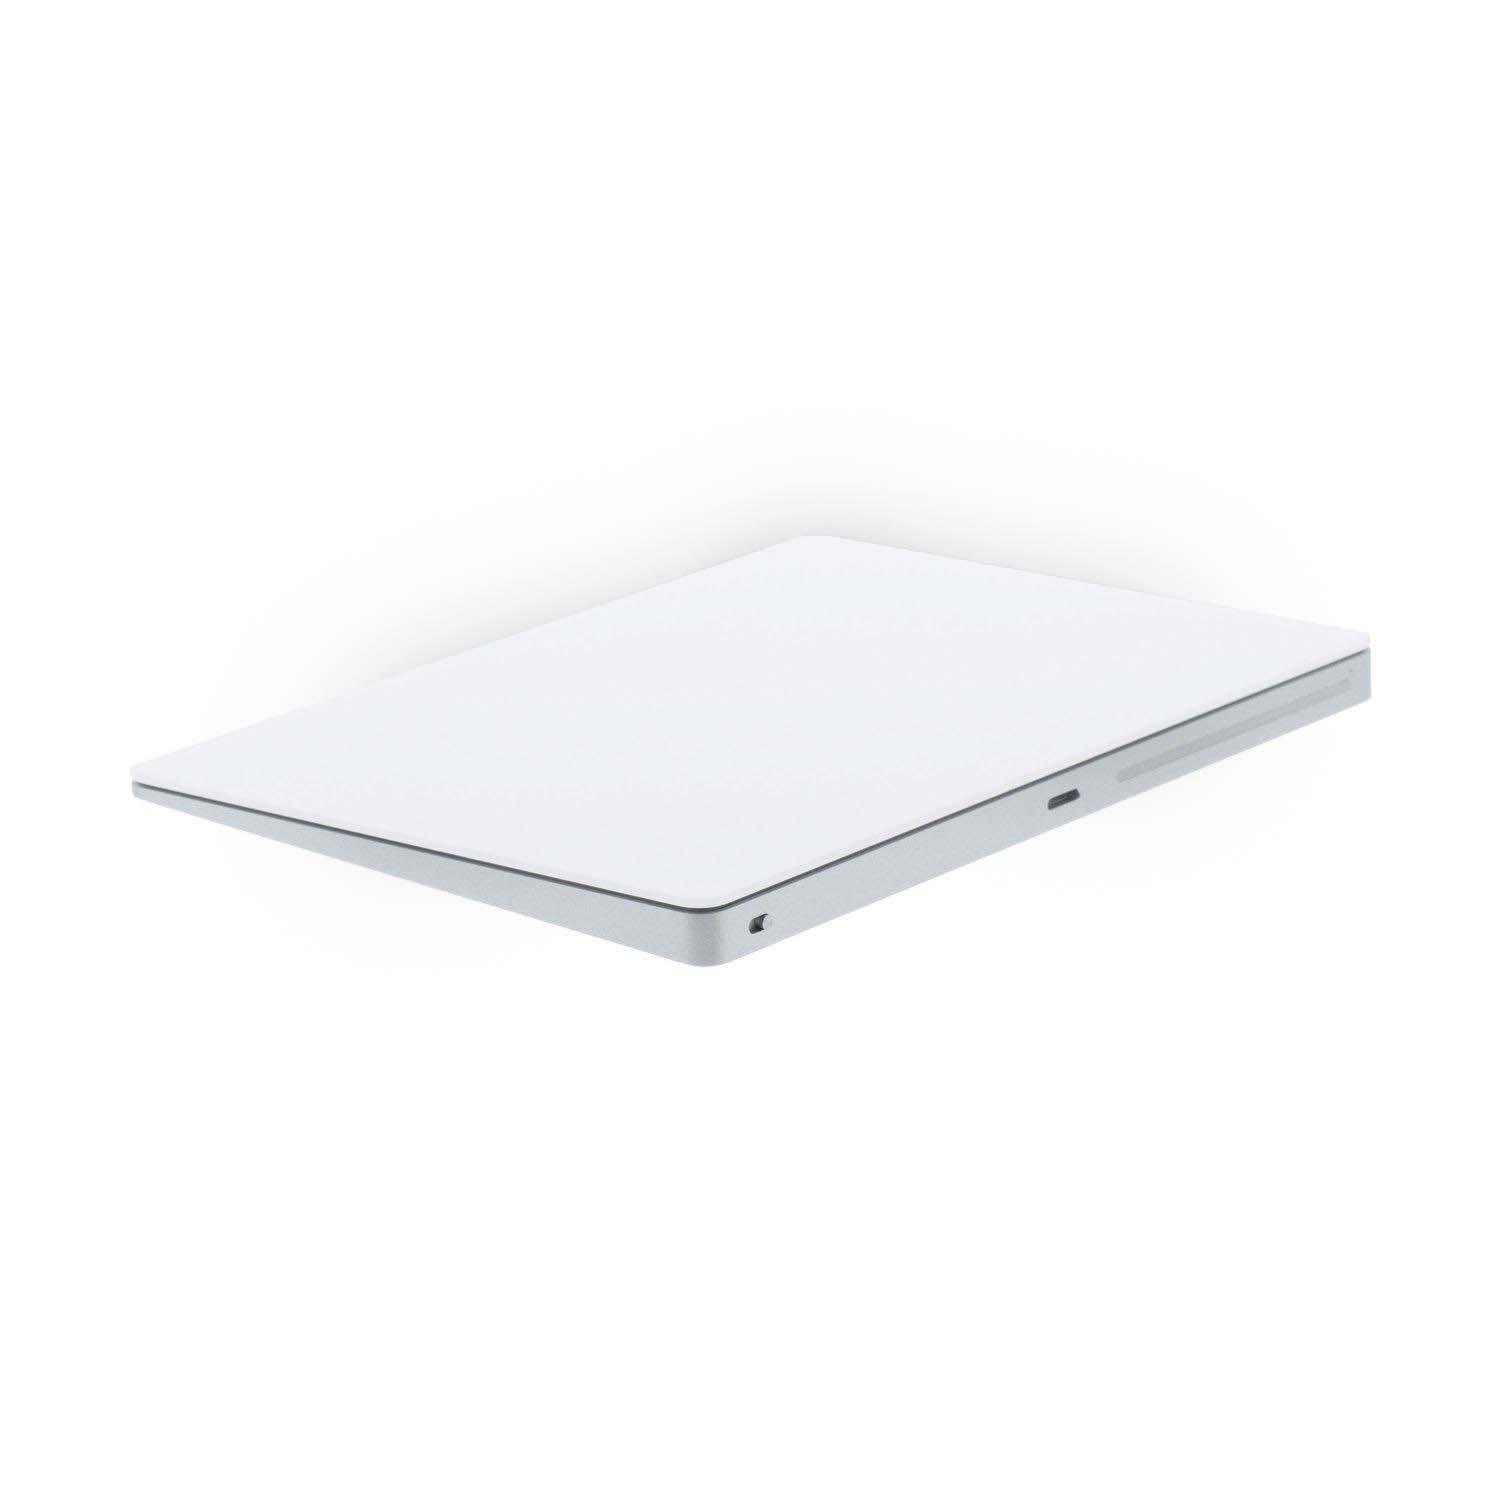 Apple Magic Trackpad 2 - Bluetooth Wireless Multi-Touch Trackpad - Silver